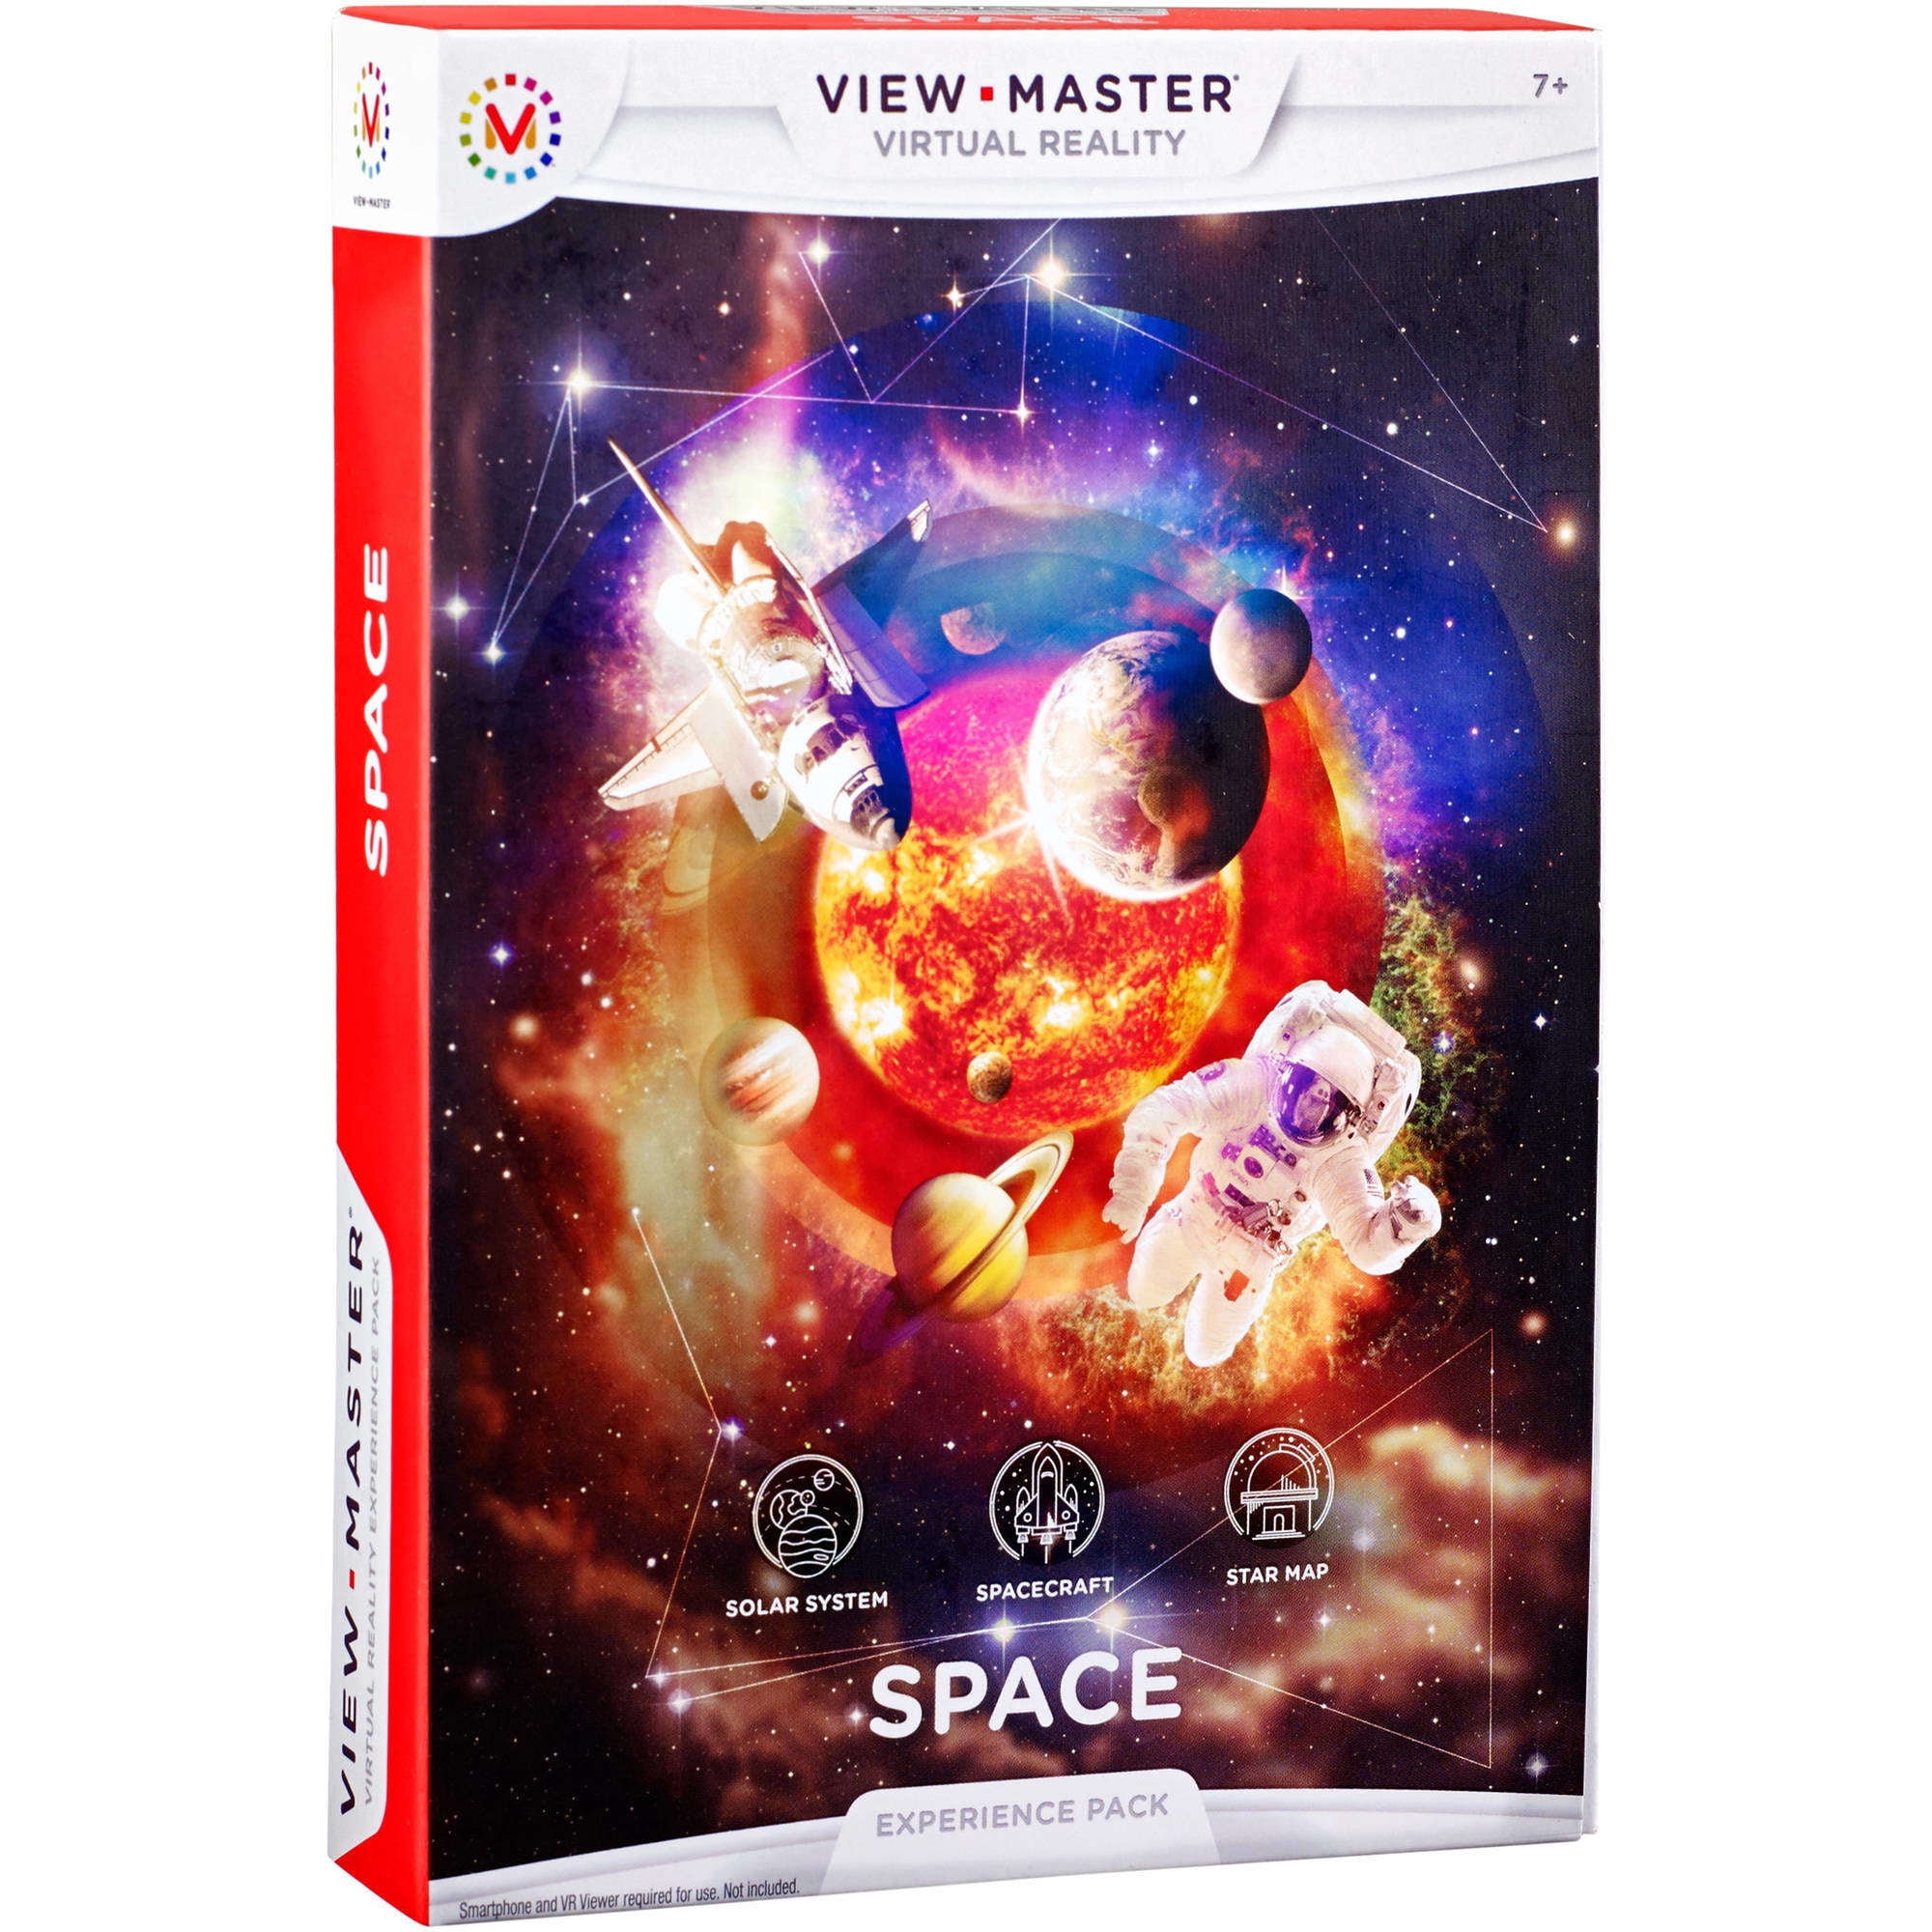 View-Master Experience Pack, Space Explorations 